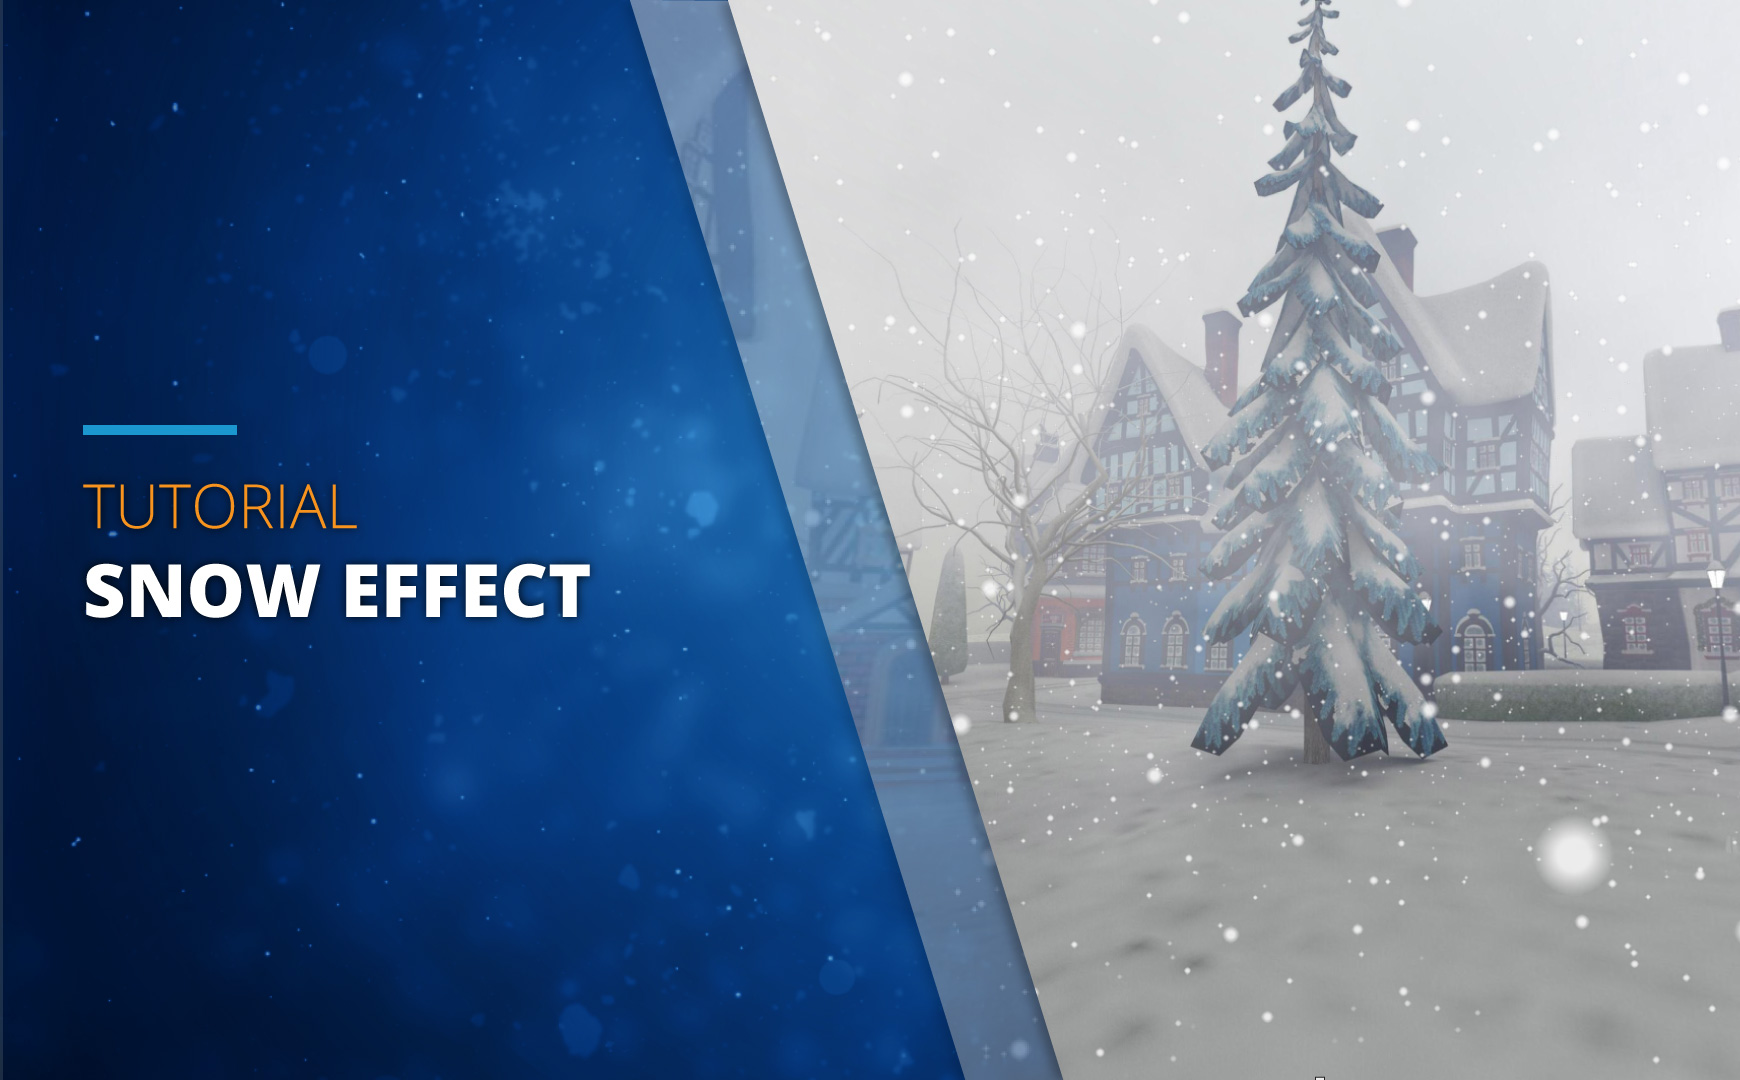 Snow Effect for Virtual Tours